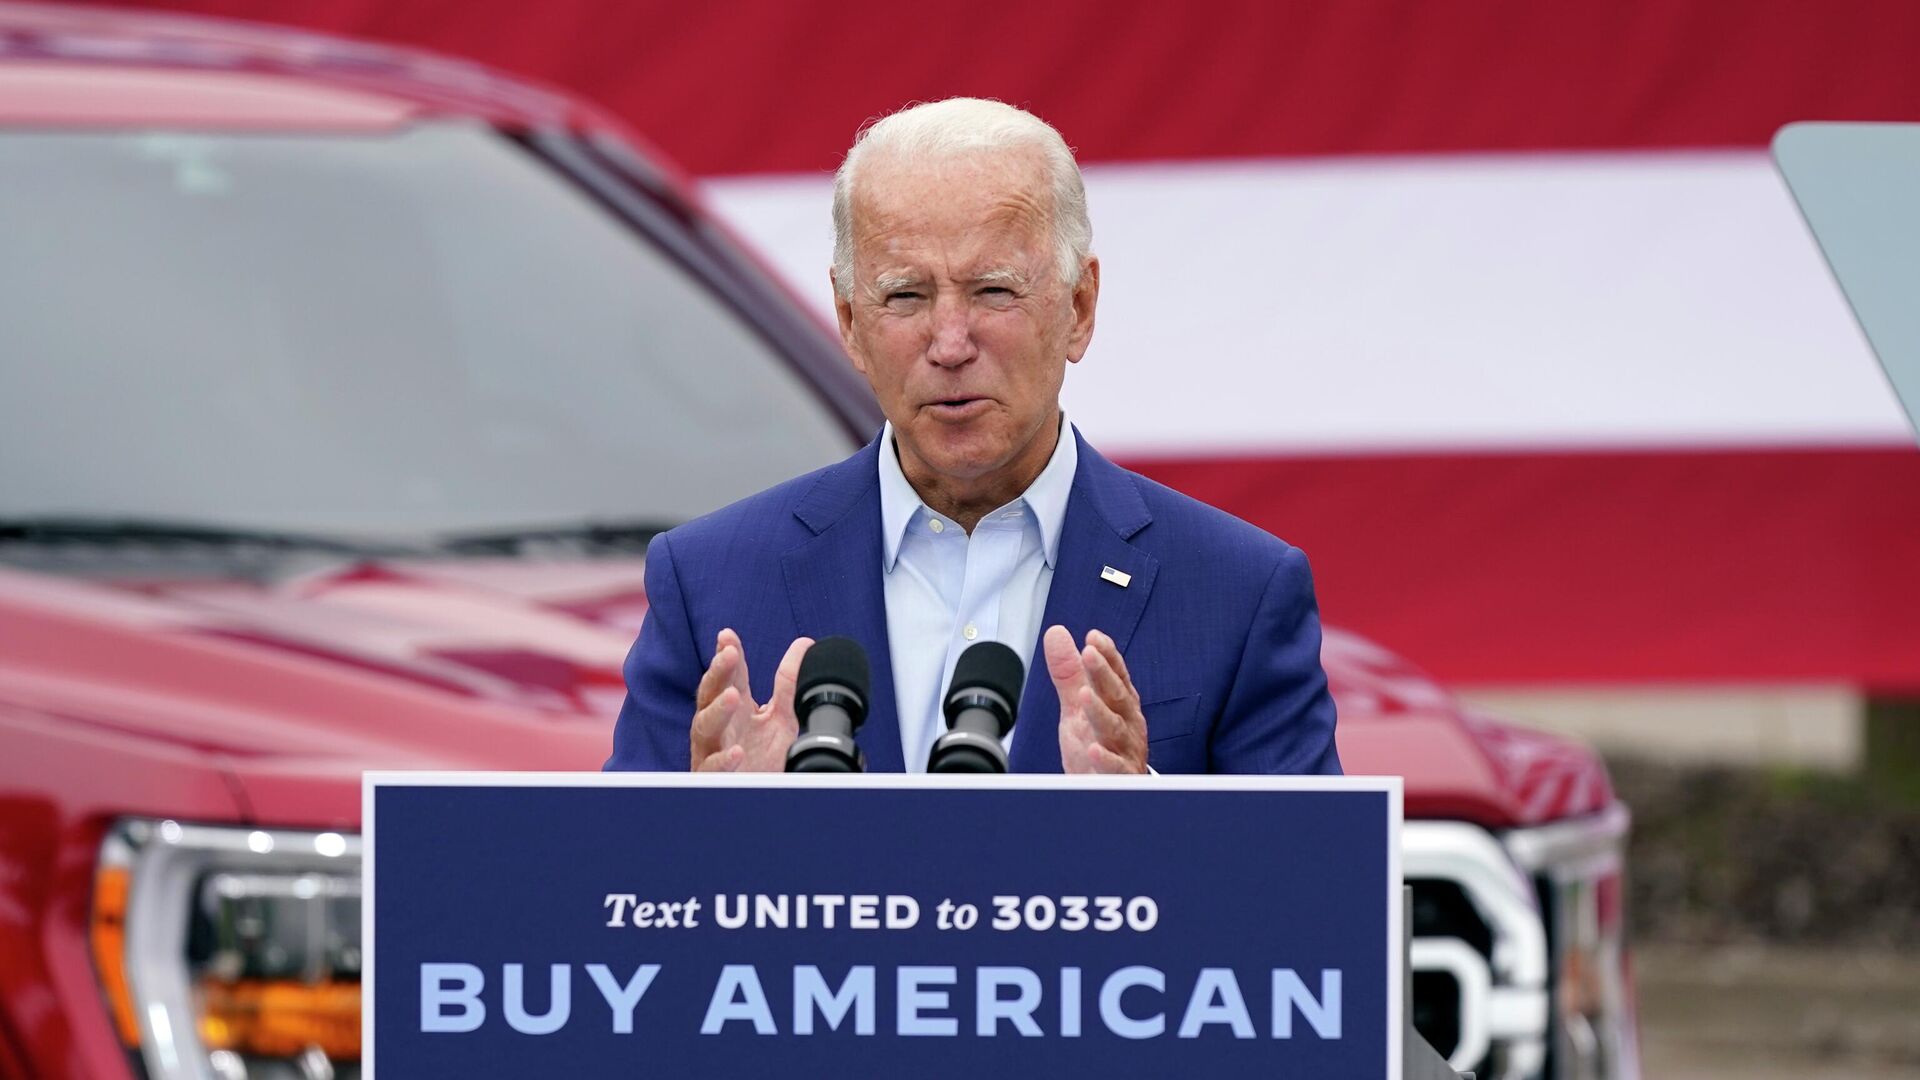 In this Wednesday, Sept. 9, 2020 file photo, Democratic presidential candidate former Vice President Joe Biden speaks during a campaign event on manufacturing and buying American-made products at UAW Region 1 headquarters in Warren, Mich. - Sputnik International, 1920, 05.05.2022